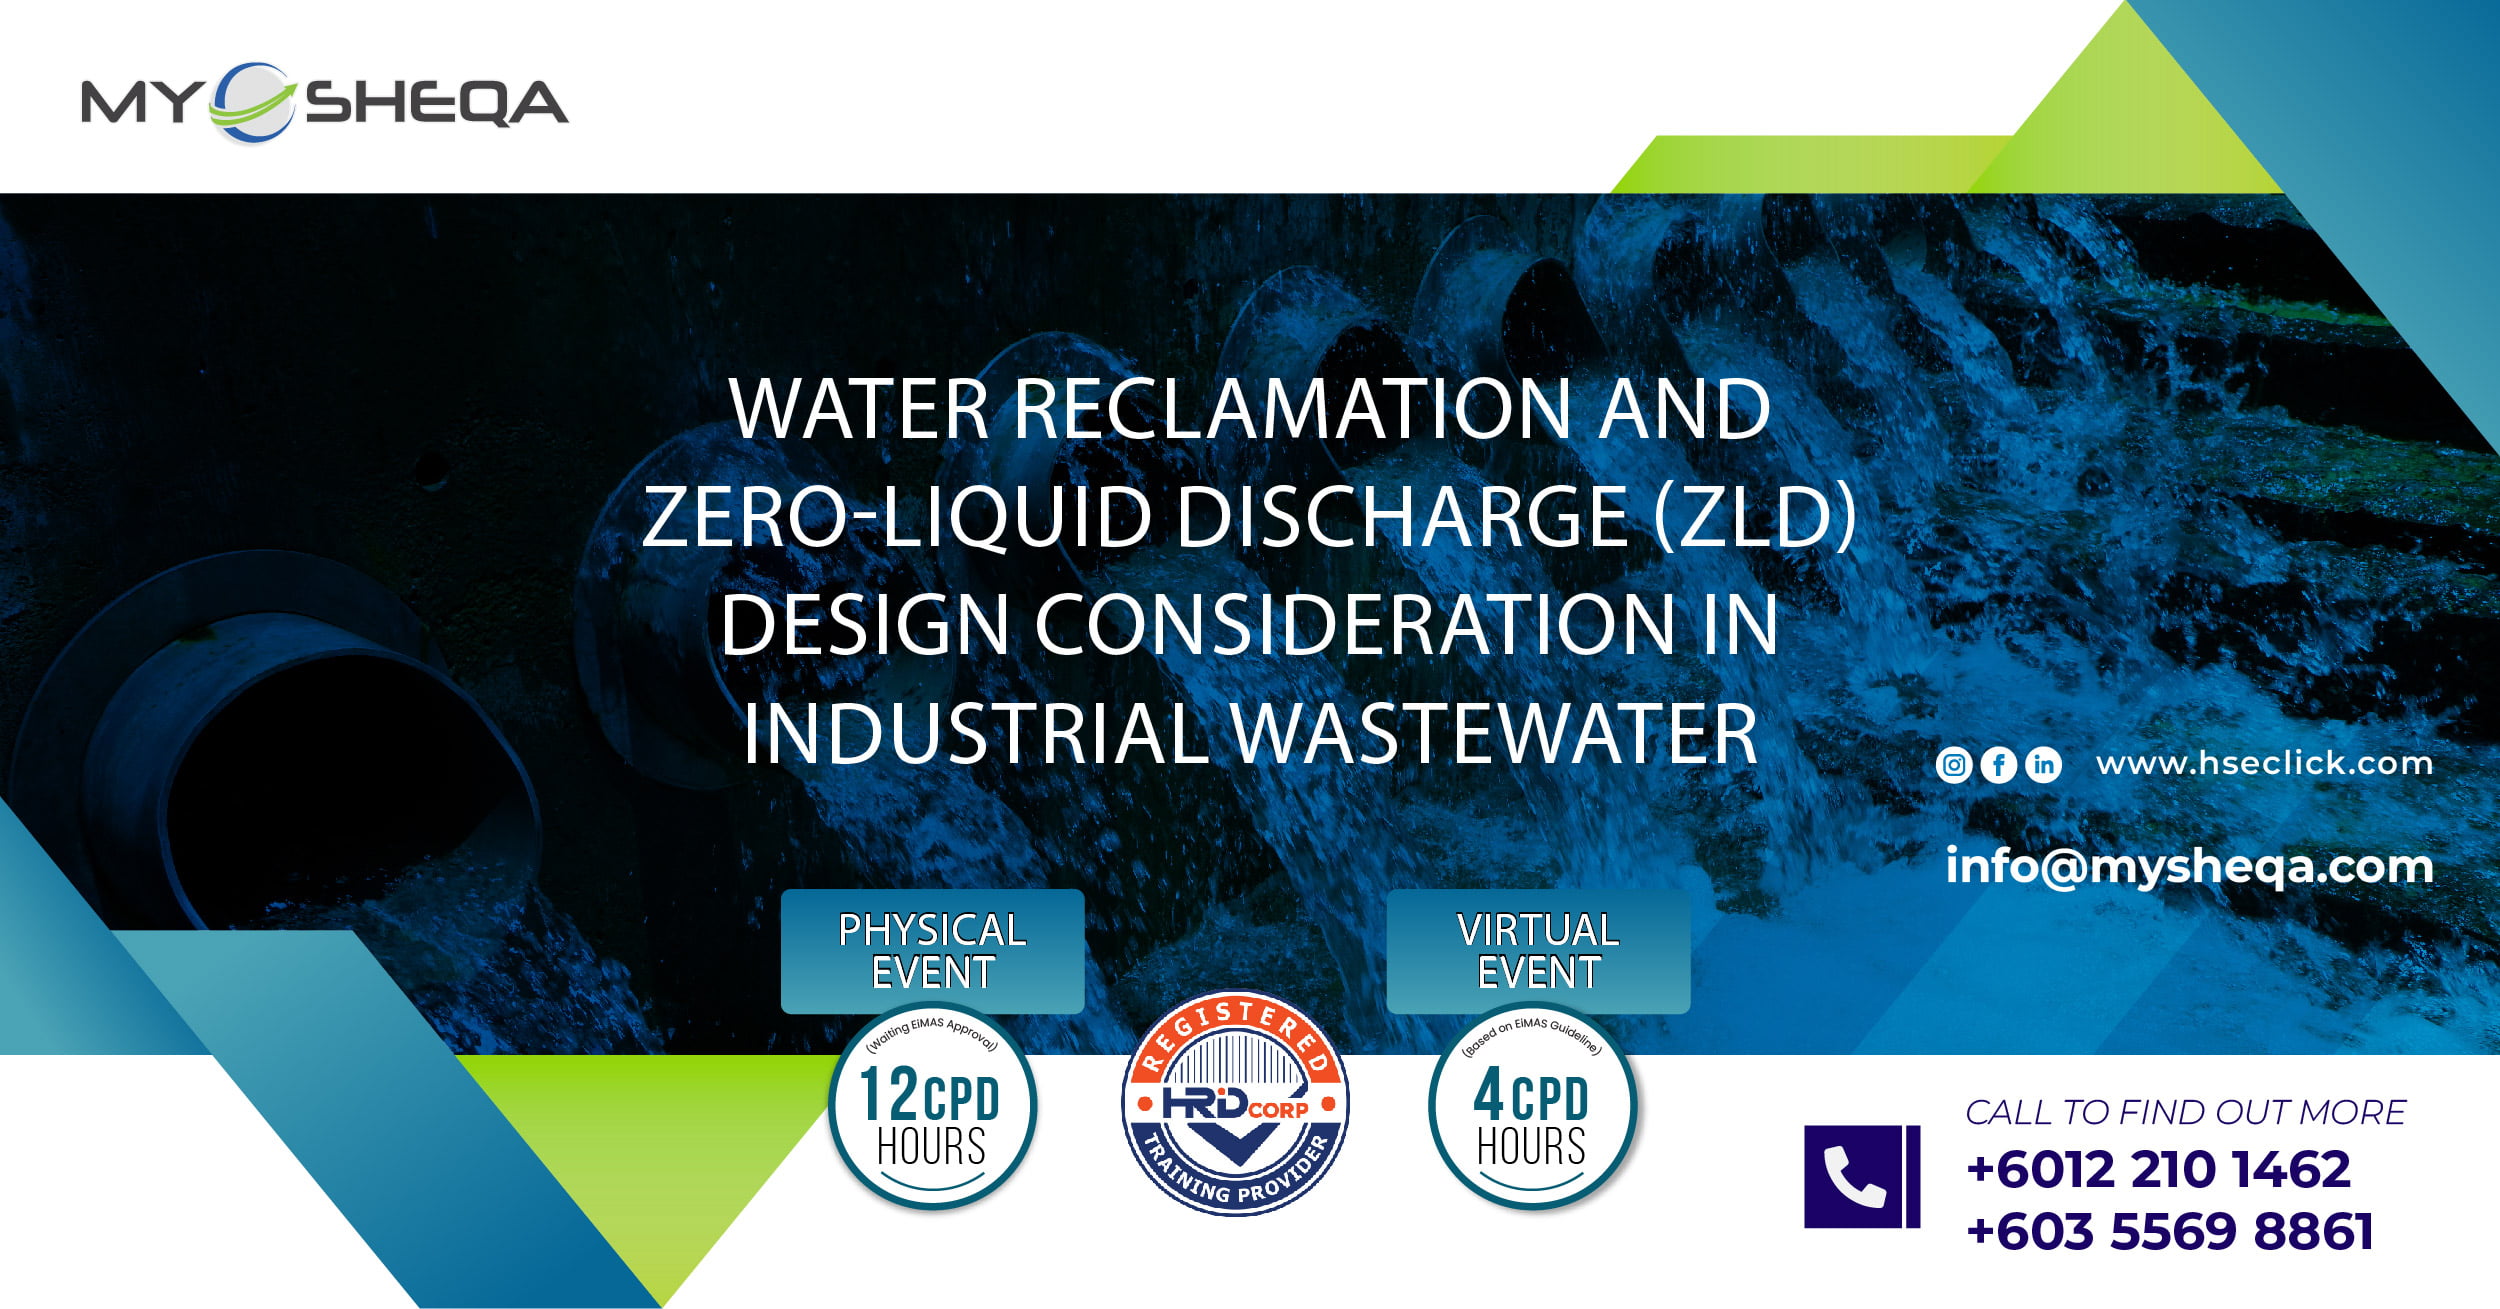 Water Reclamation and Zero-Liquid Discharge (ZLD) Design Consideration in Industrial Wastewater-01